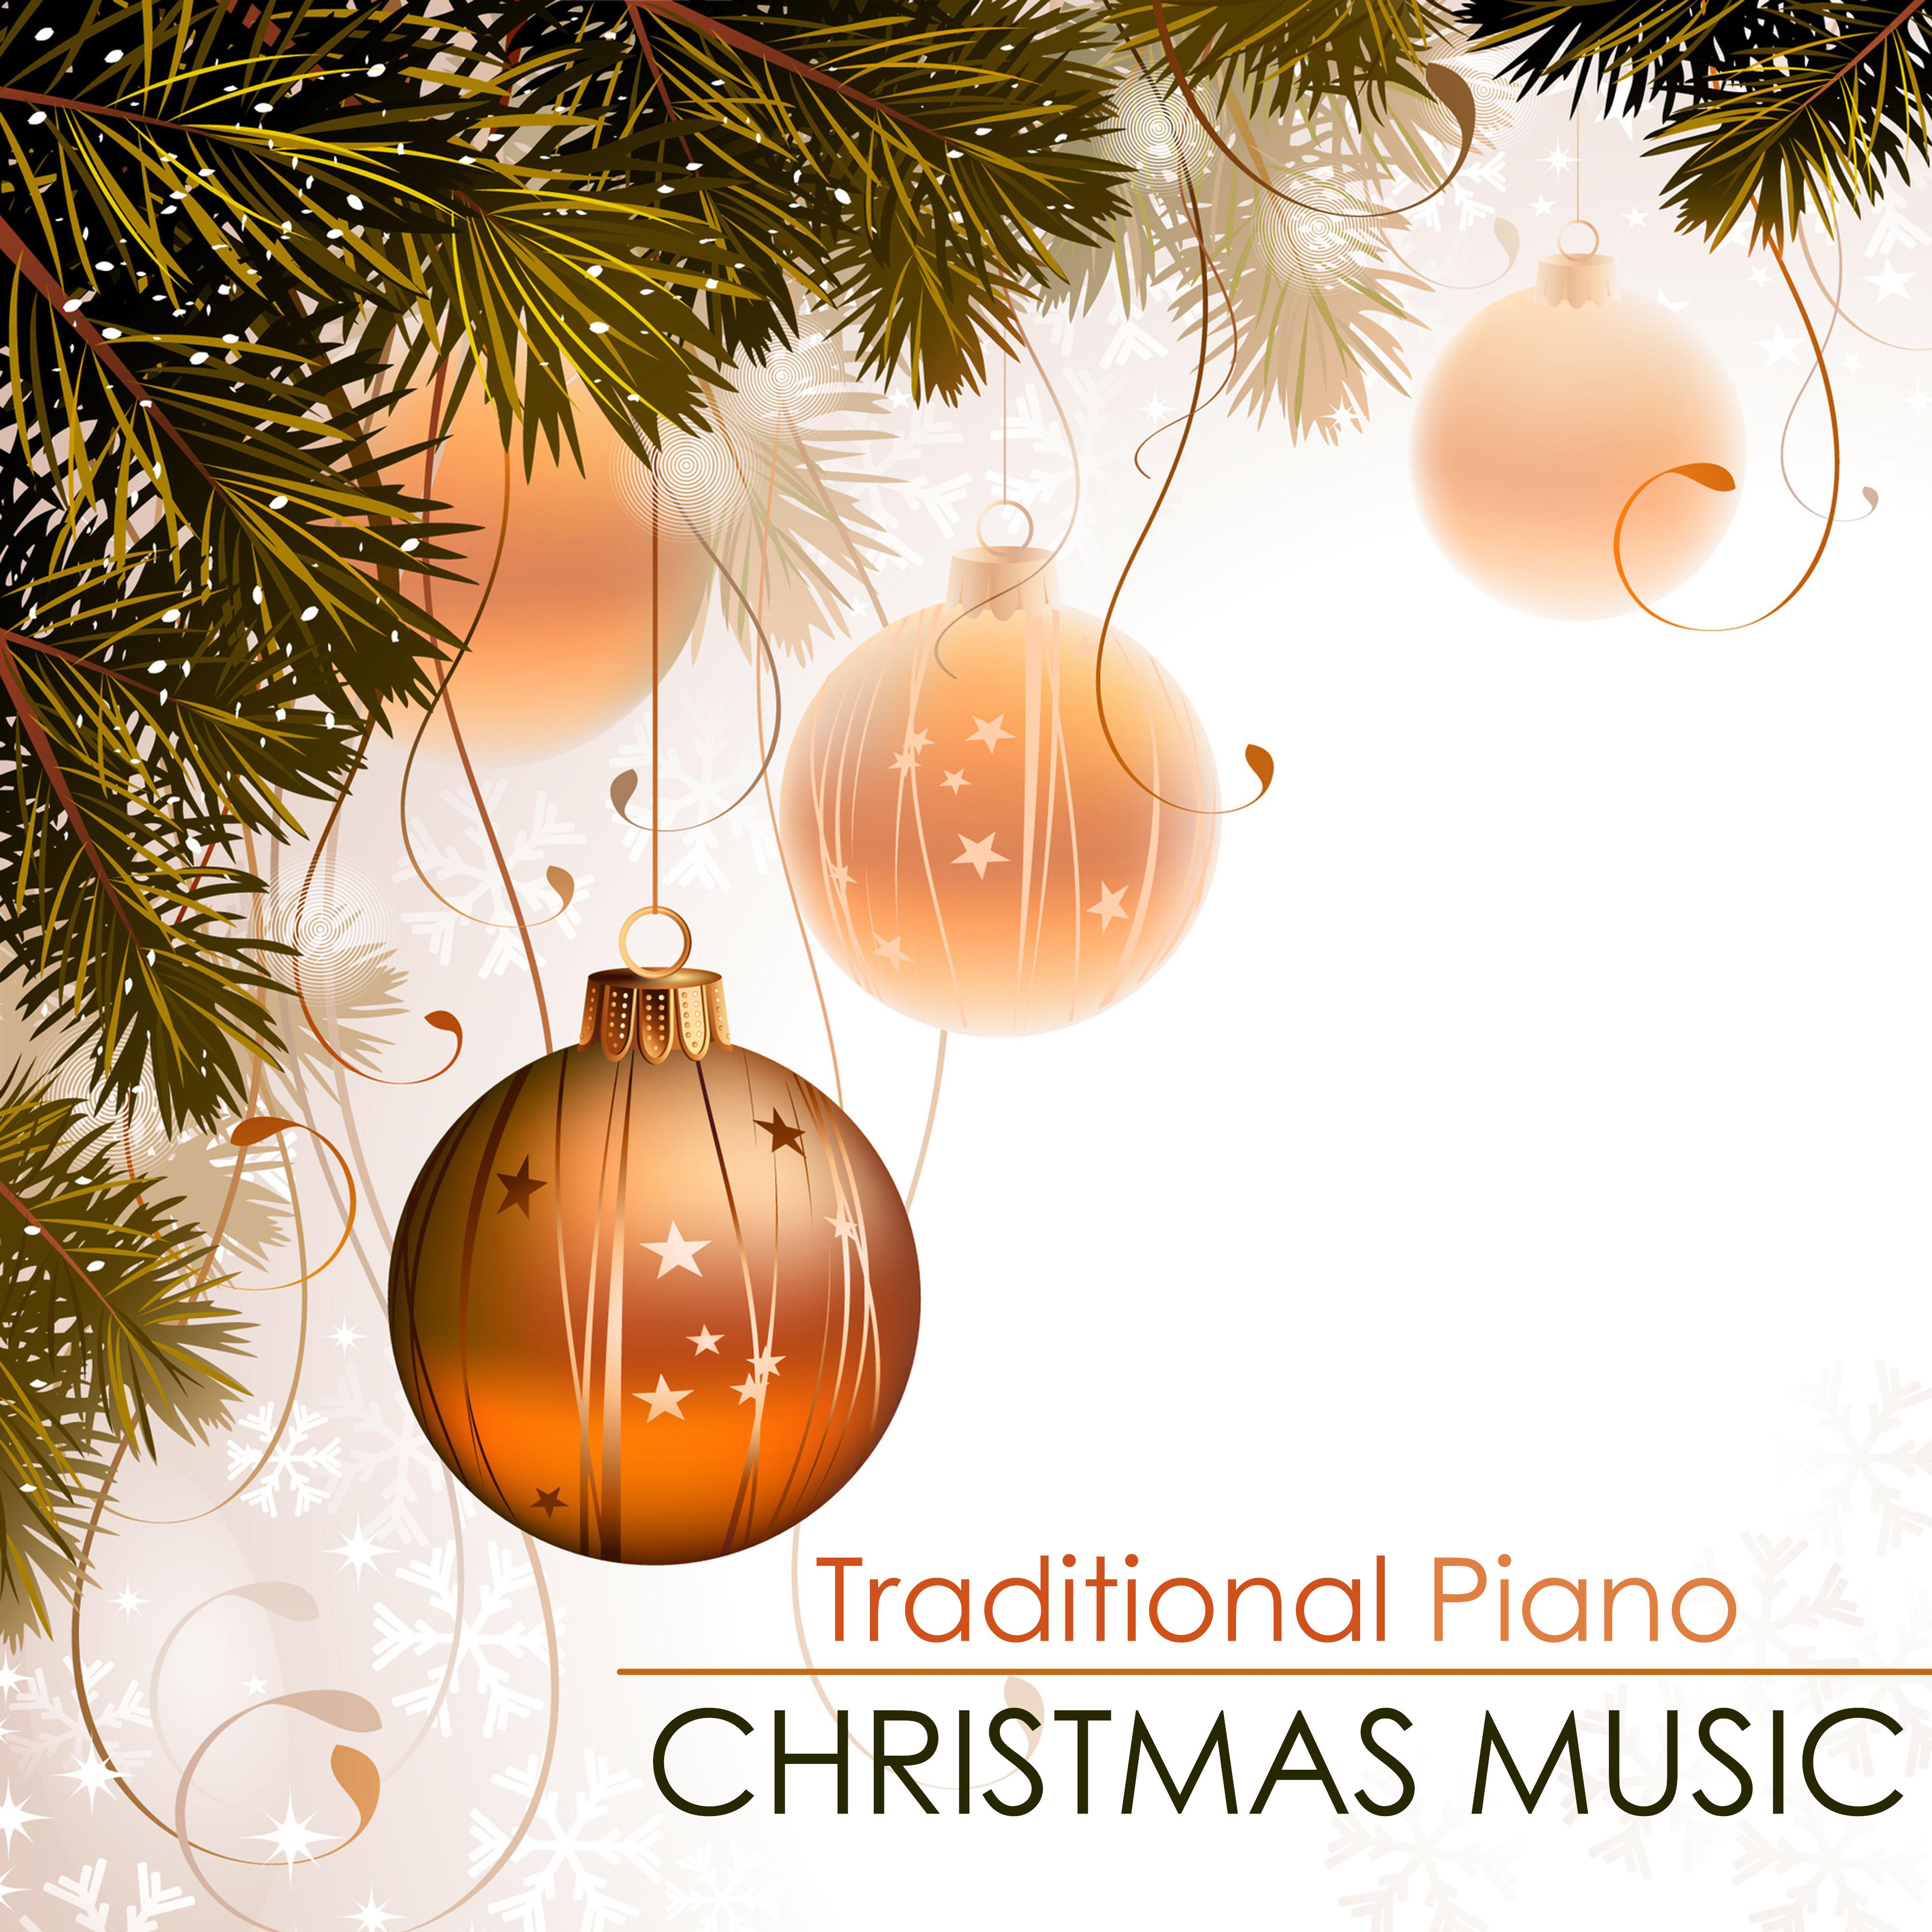 Traditional Piano Christmas Music - Soft Ambient Xmas Songs for a Snowy Relaxing Day